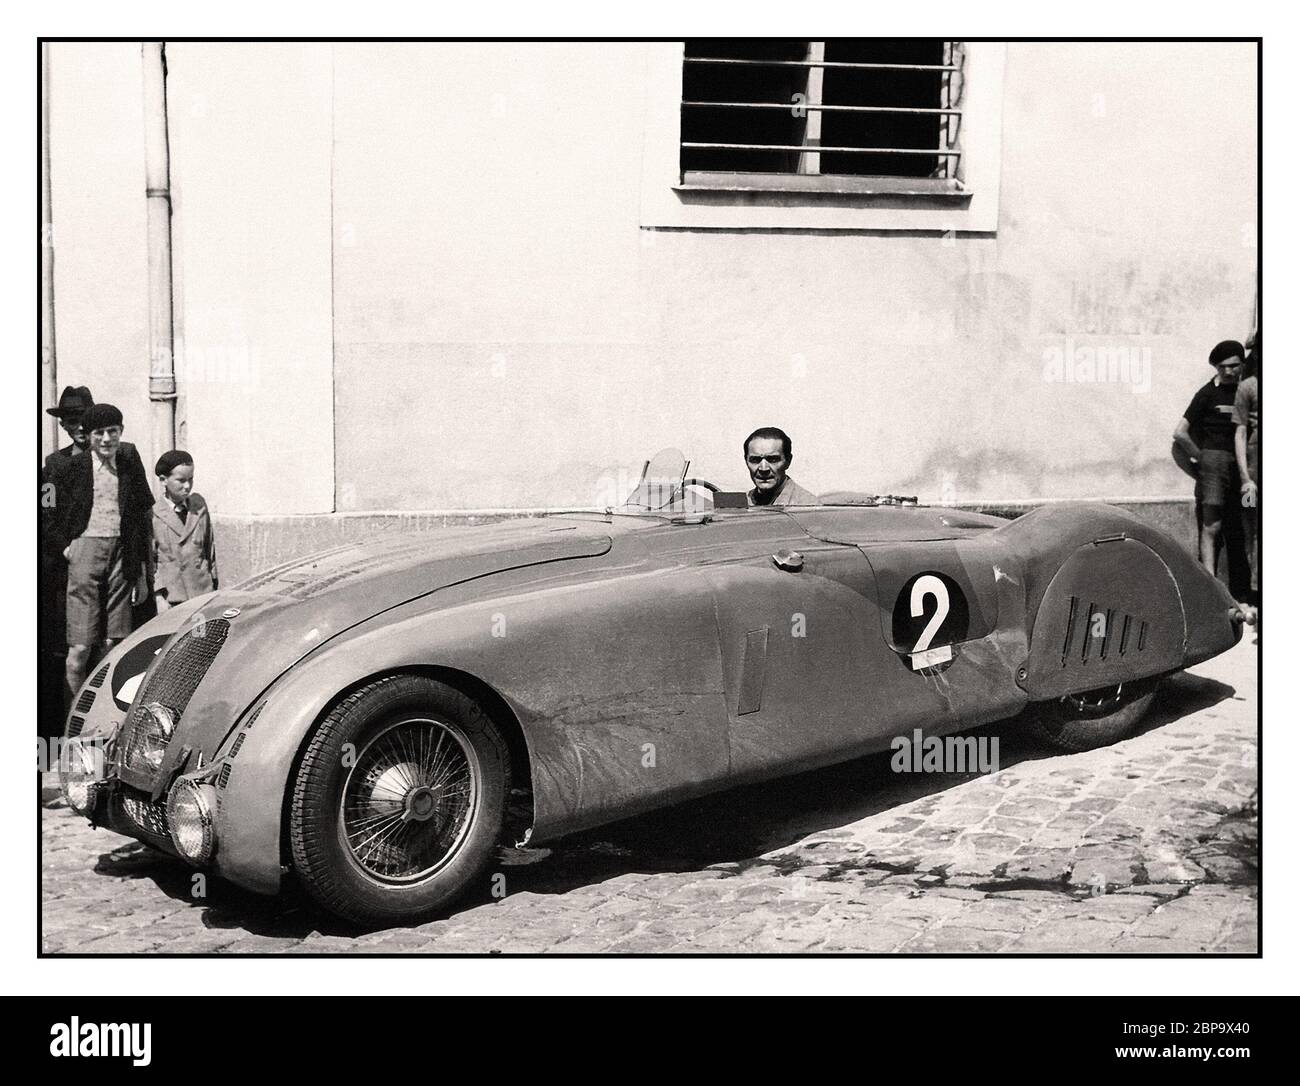 1930's BUGATTI 57G Robert Benoist, in the Bugatti 57G which was victorious in the 1937 24 Hours of Le Mans after completing 243 laps, well ahead of any rivals Stock Photo